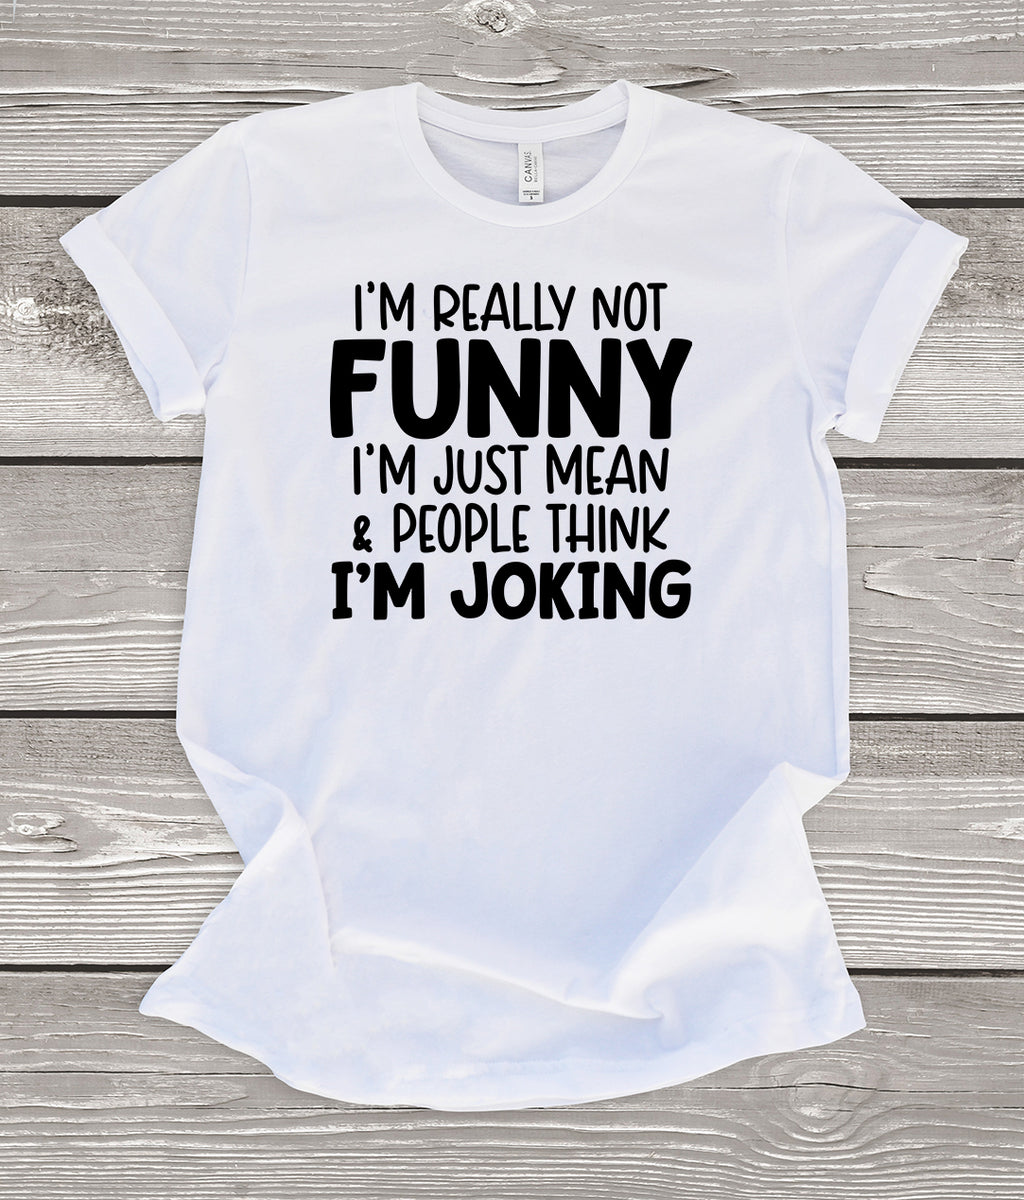 I'm Really Not Funny I'm Just Mean & People Think I'm Joking White T-Shirt